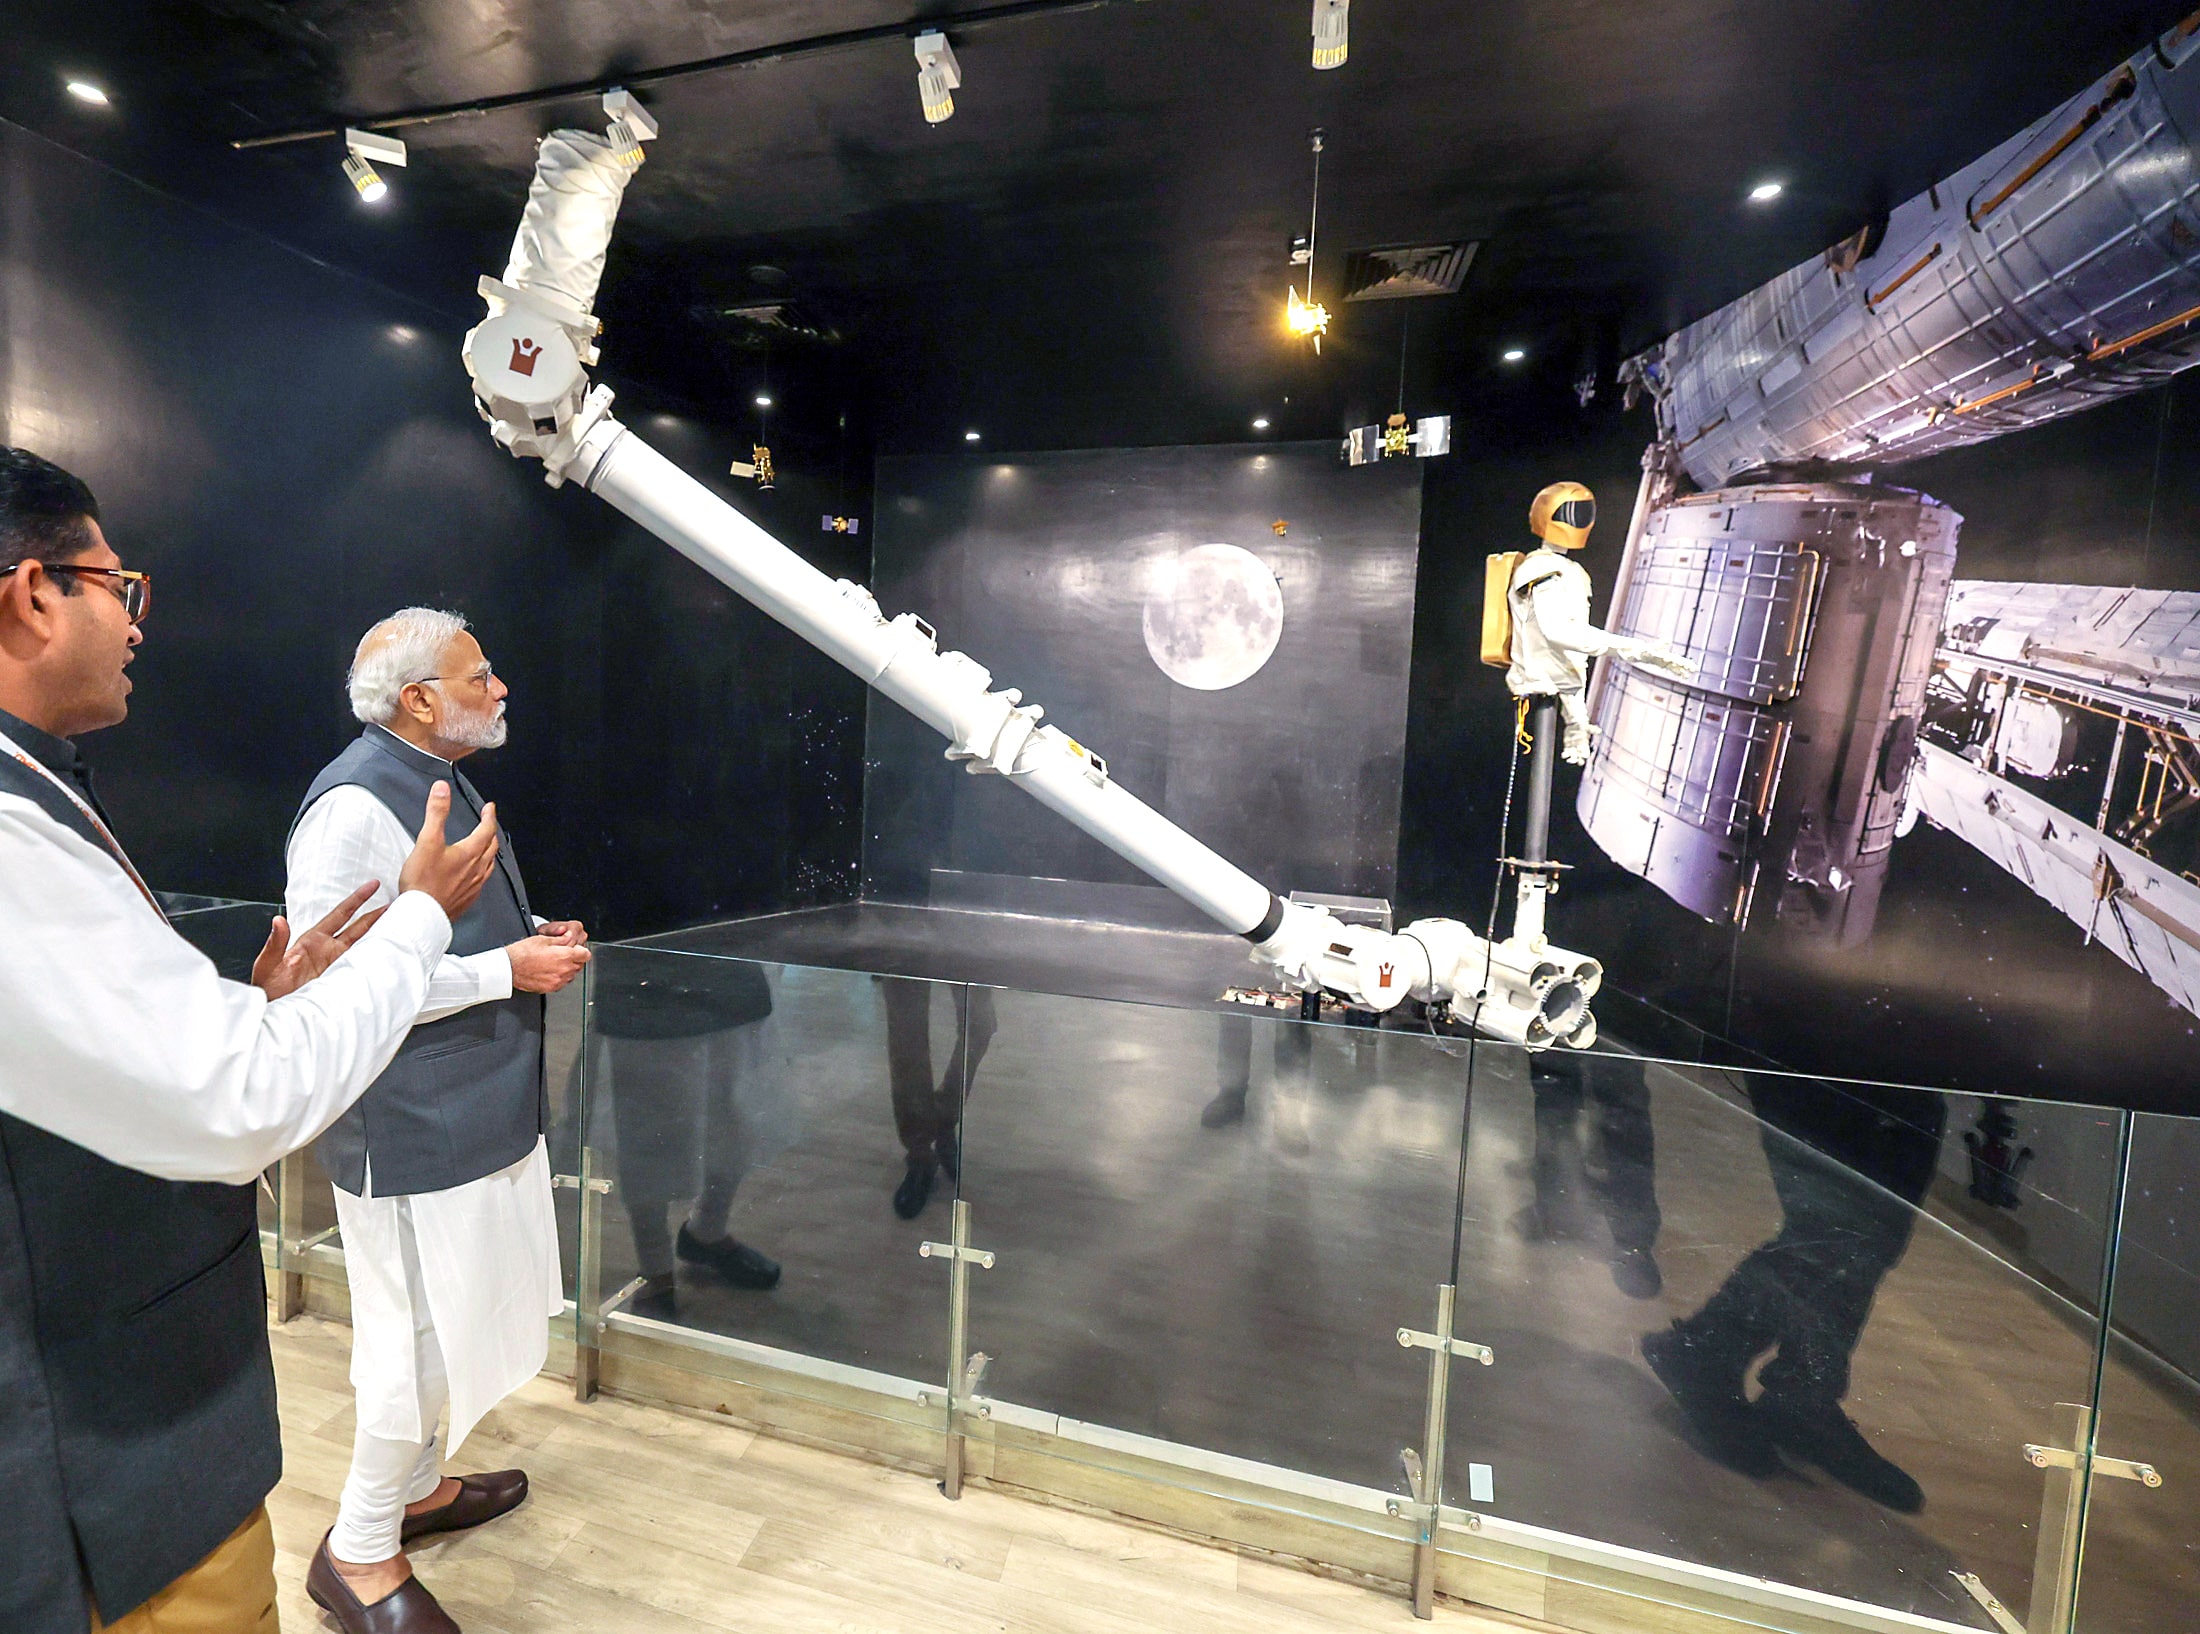 PM Narendra Modi gets a know-how about products at Robotics Gallery.